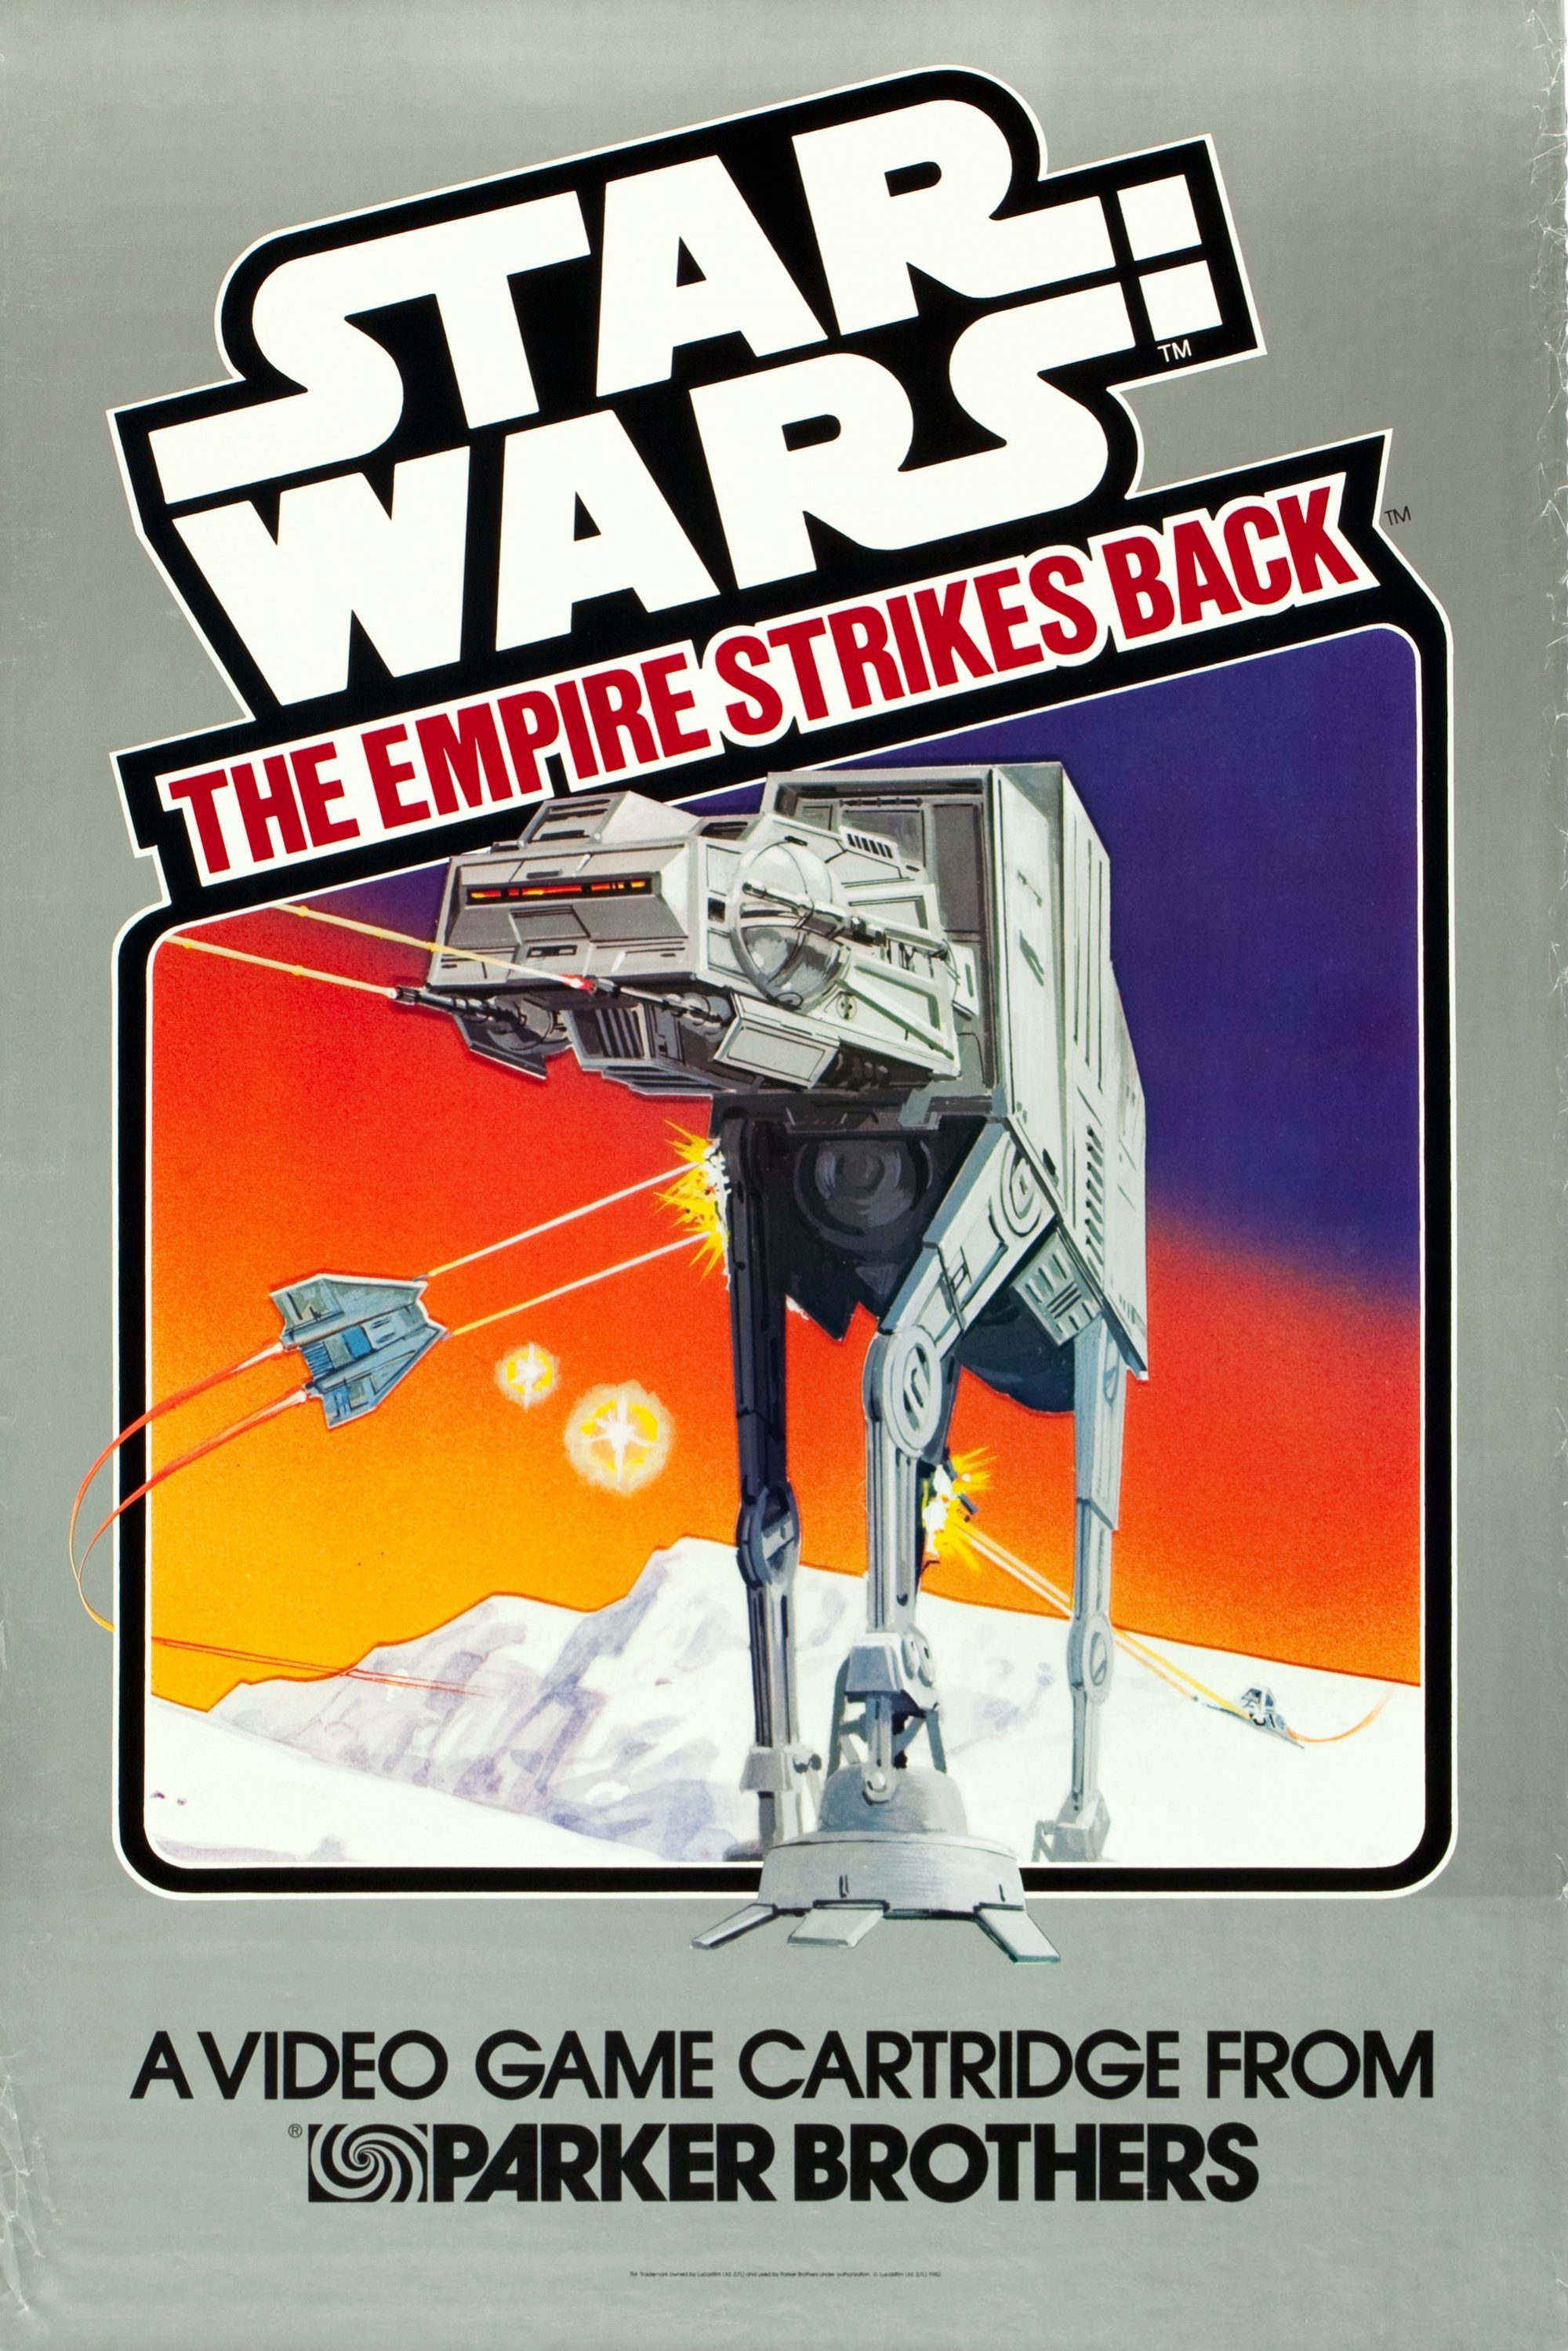 Star Wars: The Empire Strikes Back video game ad